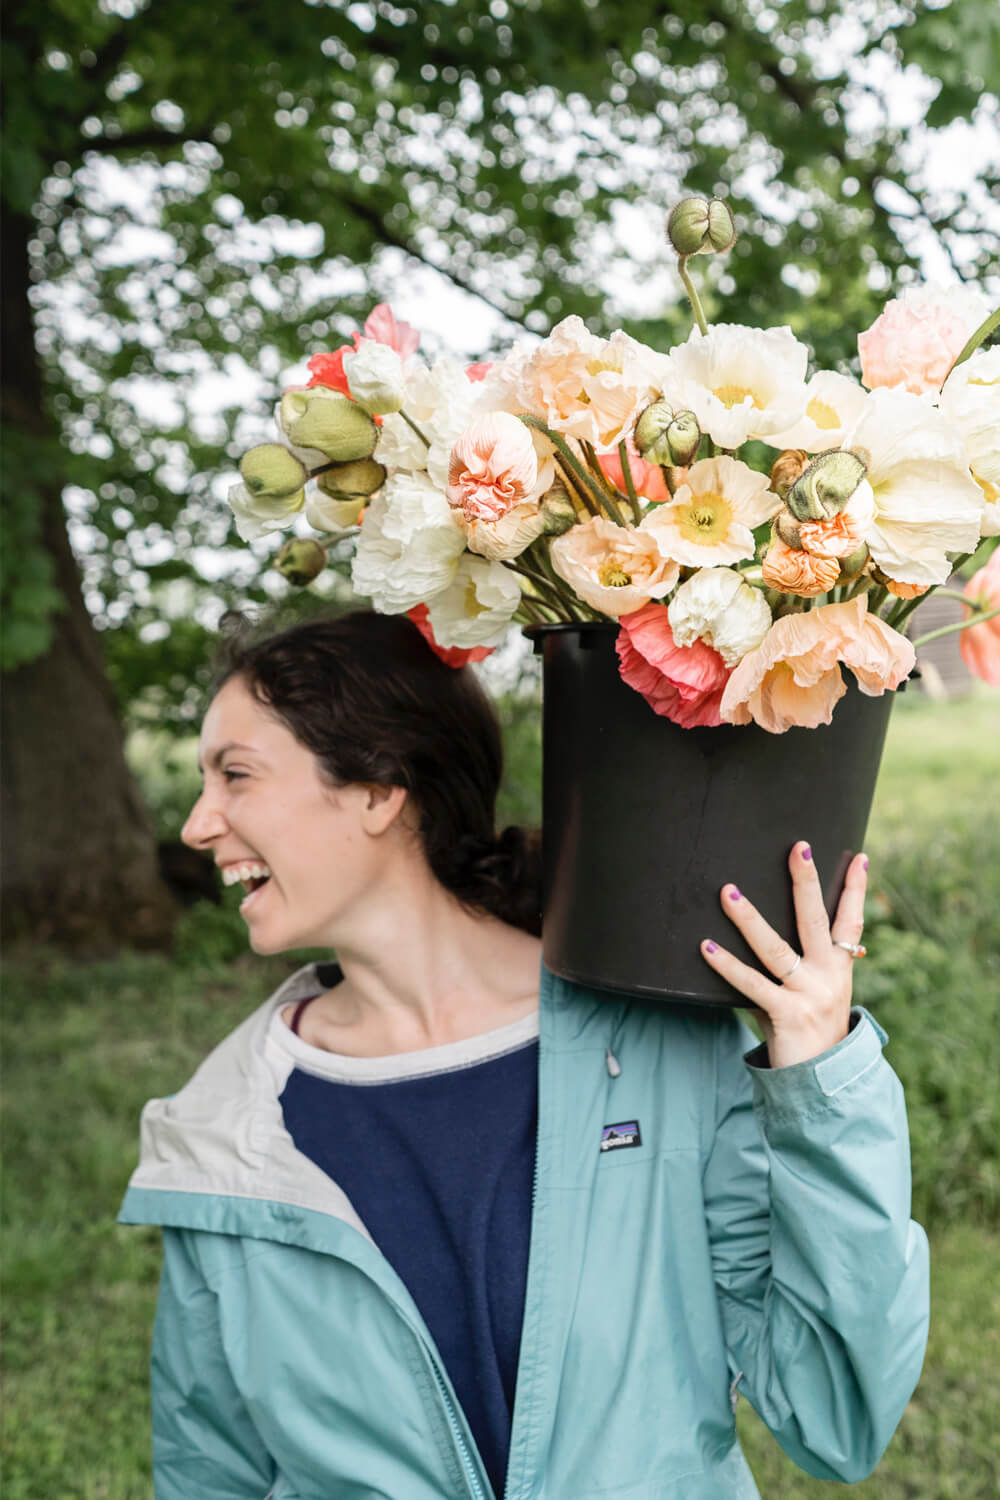 Woman holding a bucket of flowers on her shoulder